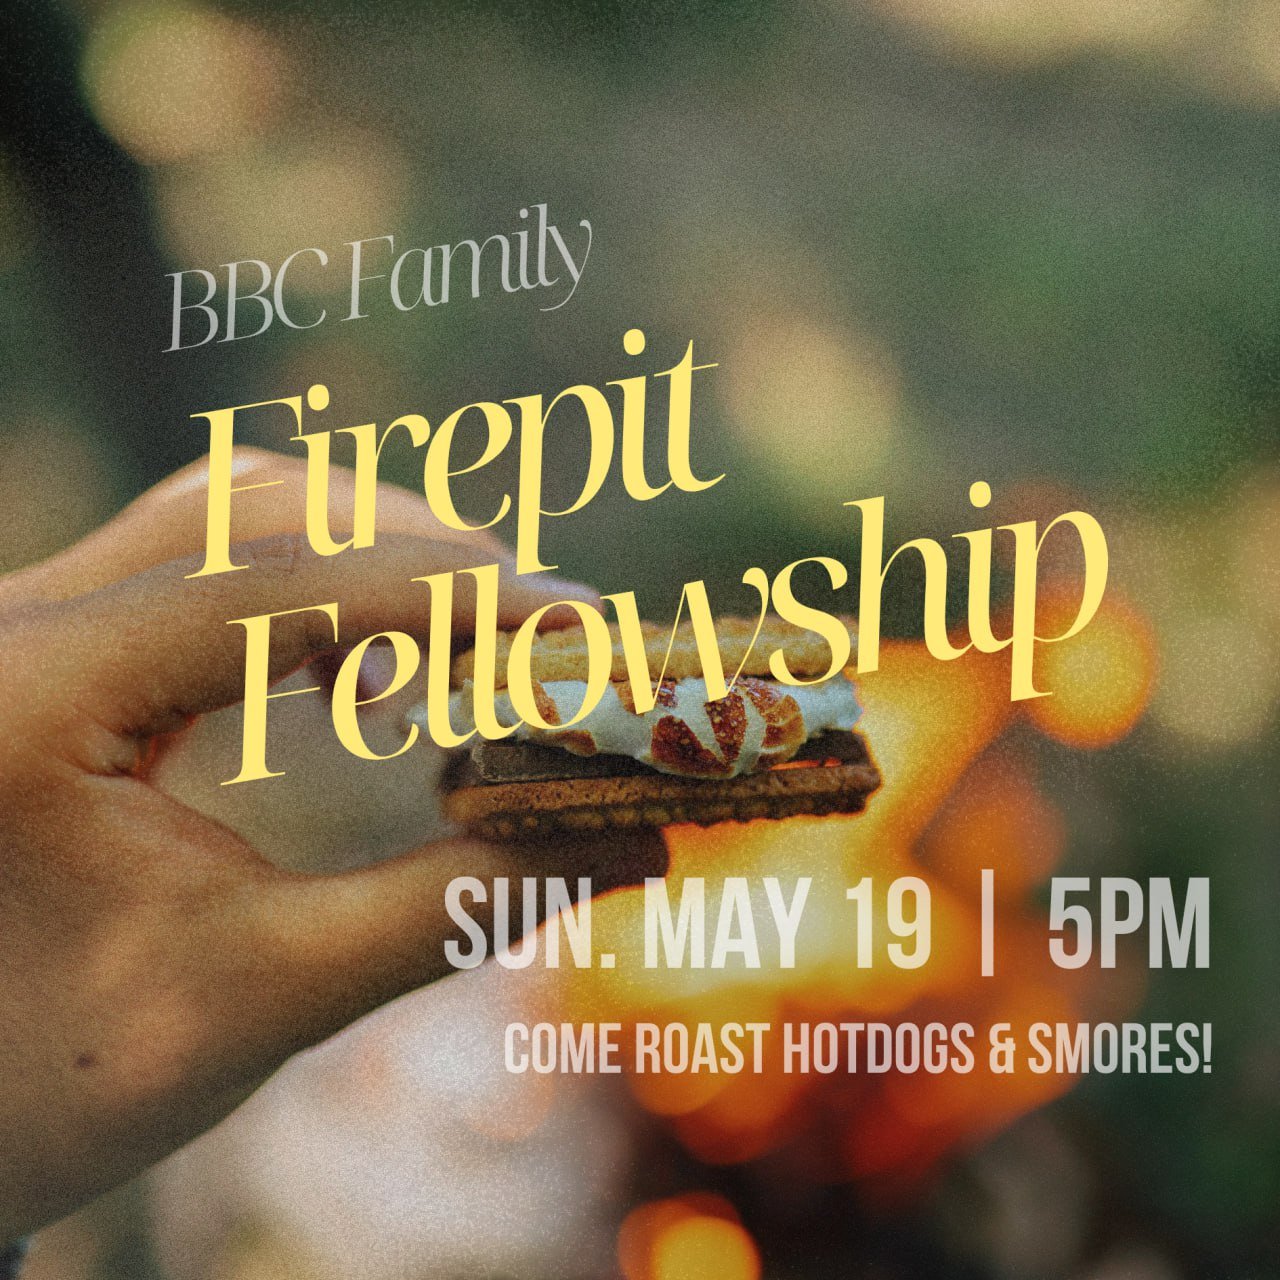 BBC Family Fire Pit Fellowship - May 19